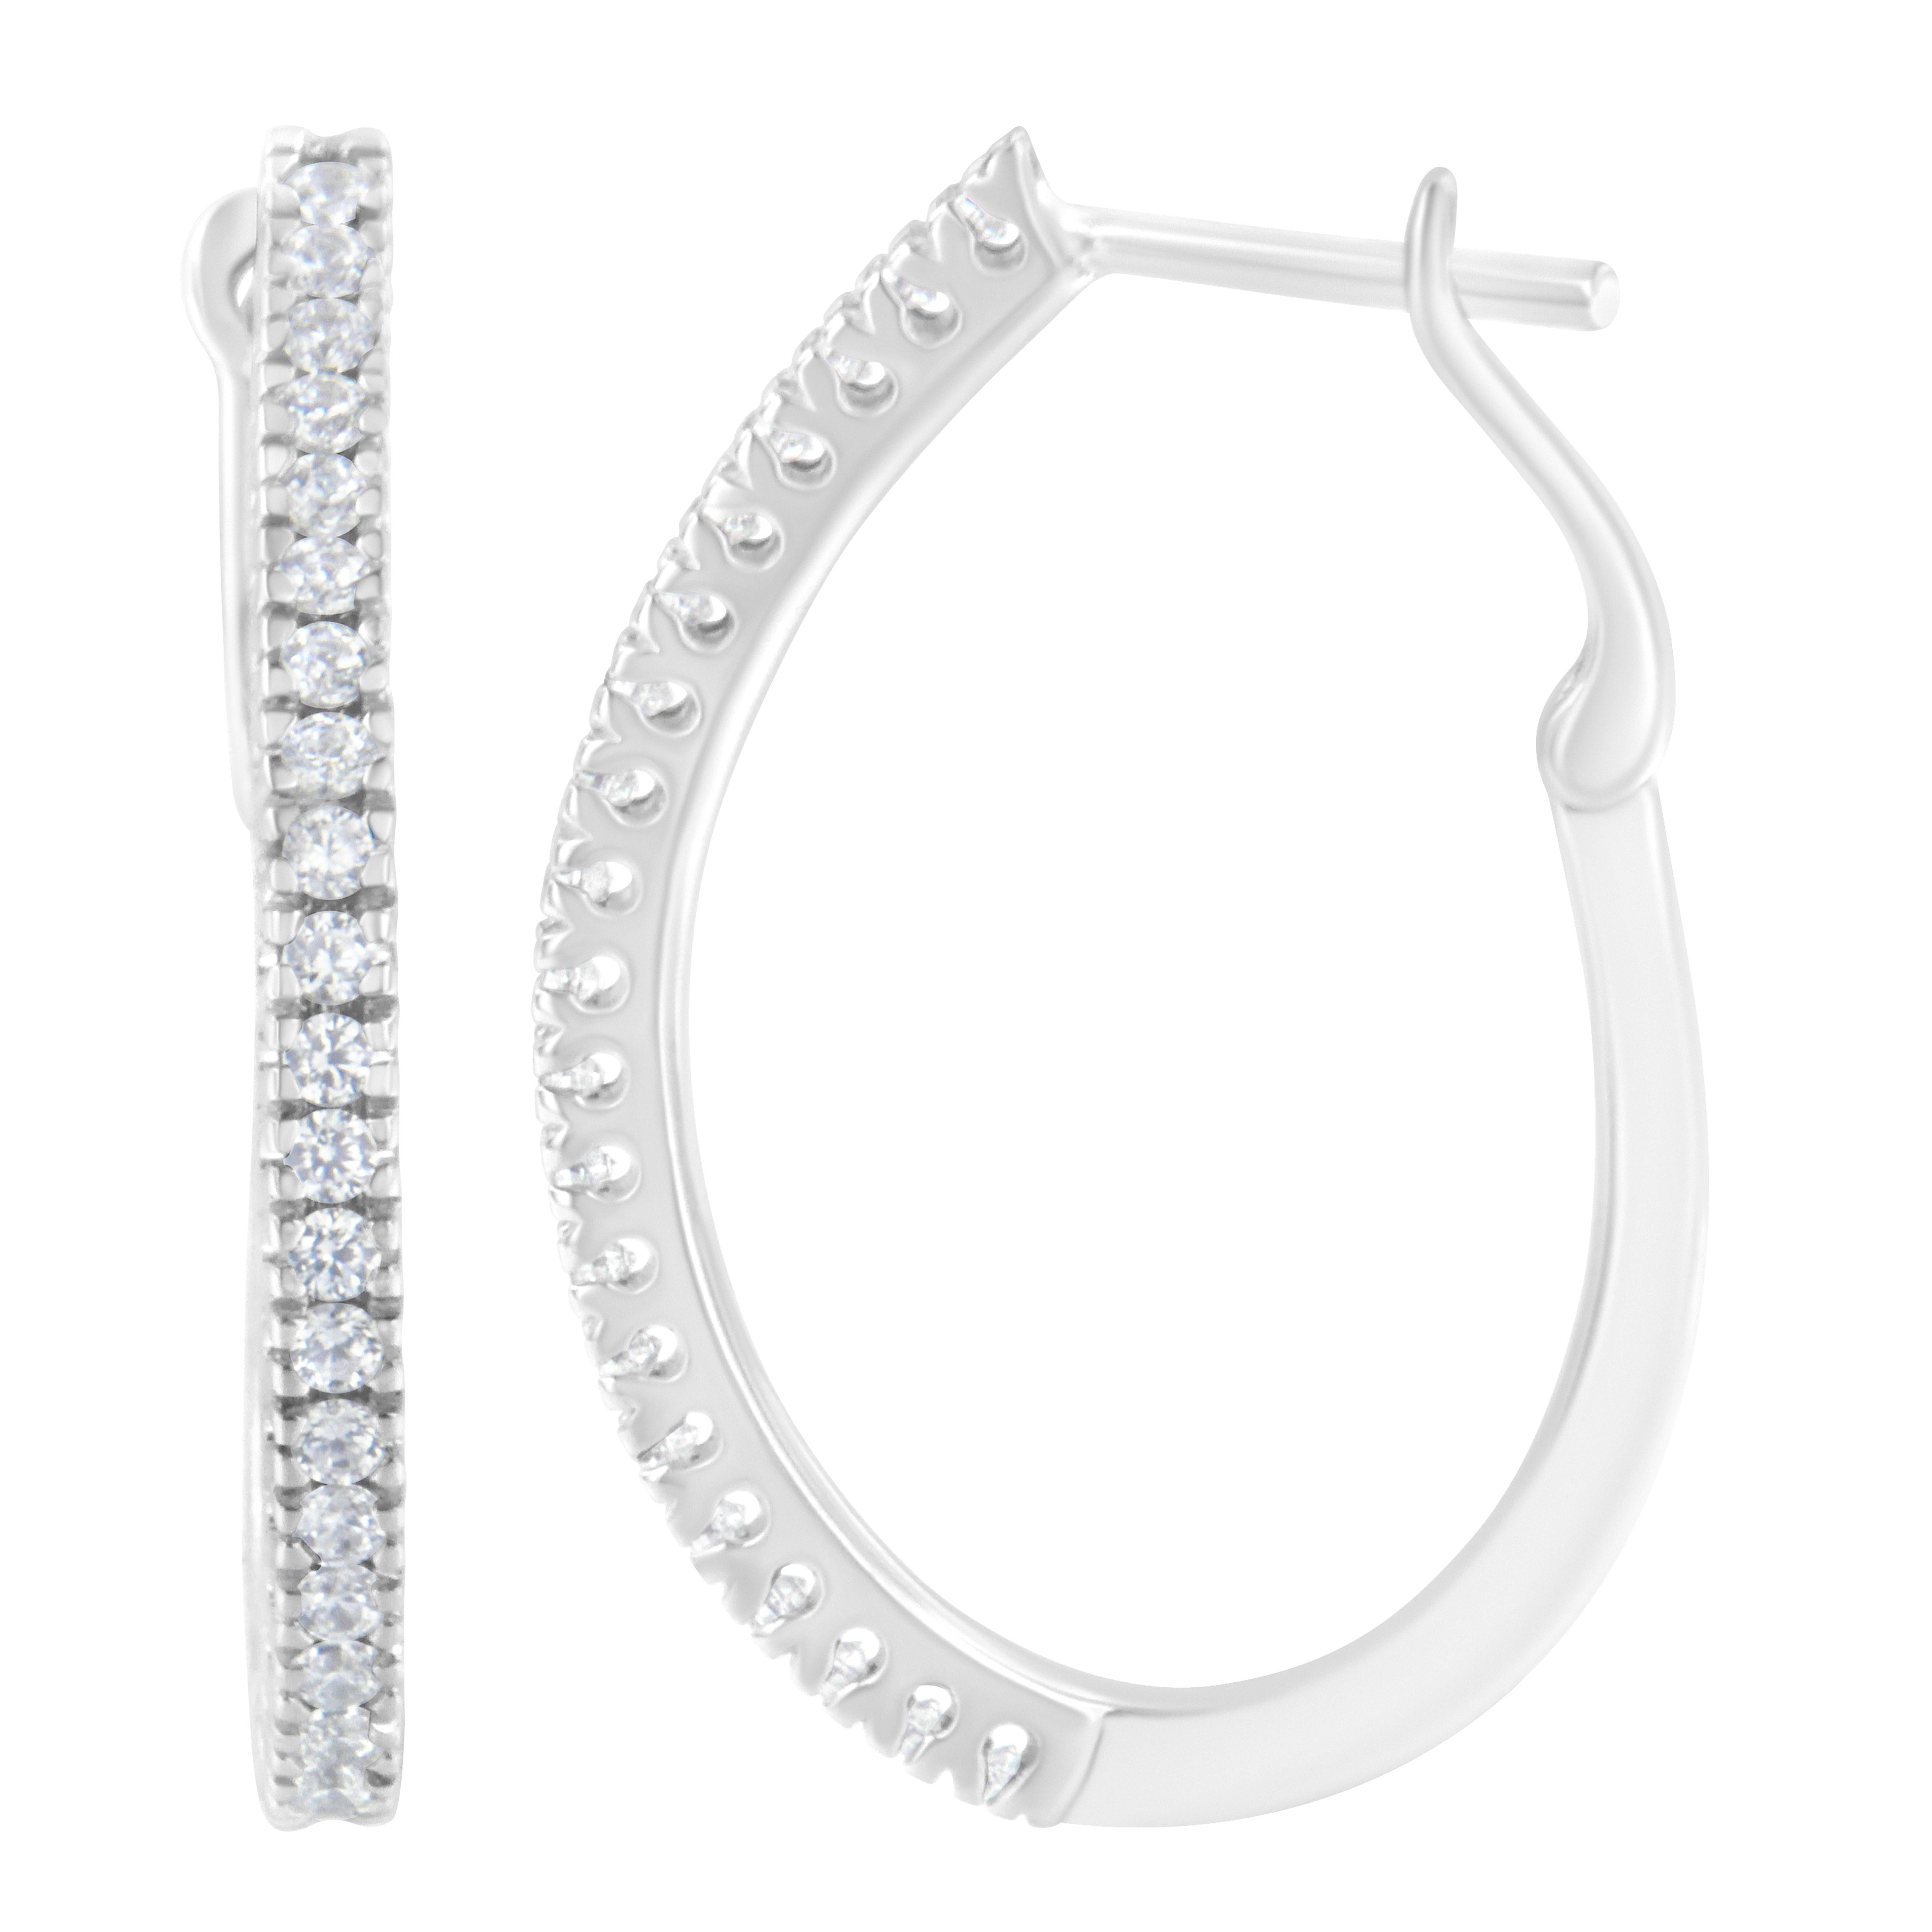 
Introducing our exquisite 10KT White Gold 1/2 cttw Diamond Hoop Earrings (I-J, I2-I3), designed to elevate your ensemble with timeless elegance and unmatched sparkle.

Crafted from luminous 10k white gold, these captivating hoop earrings boast a